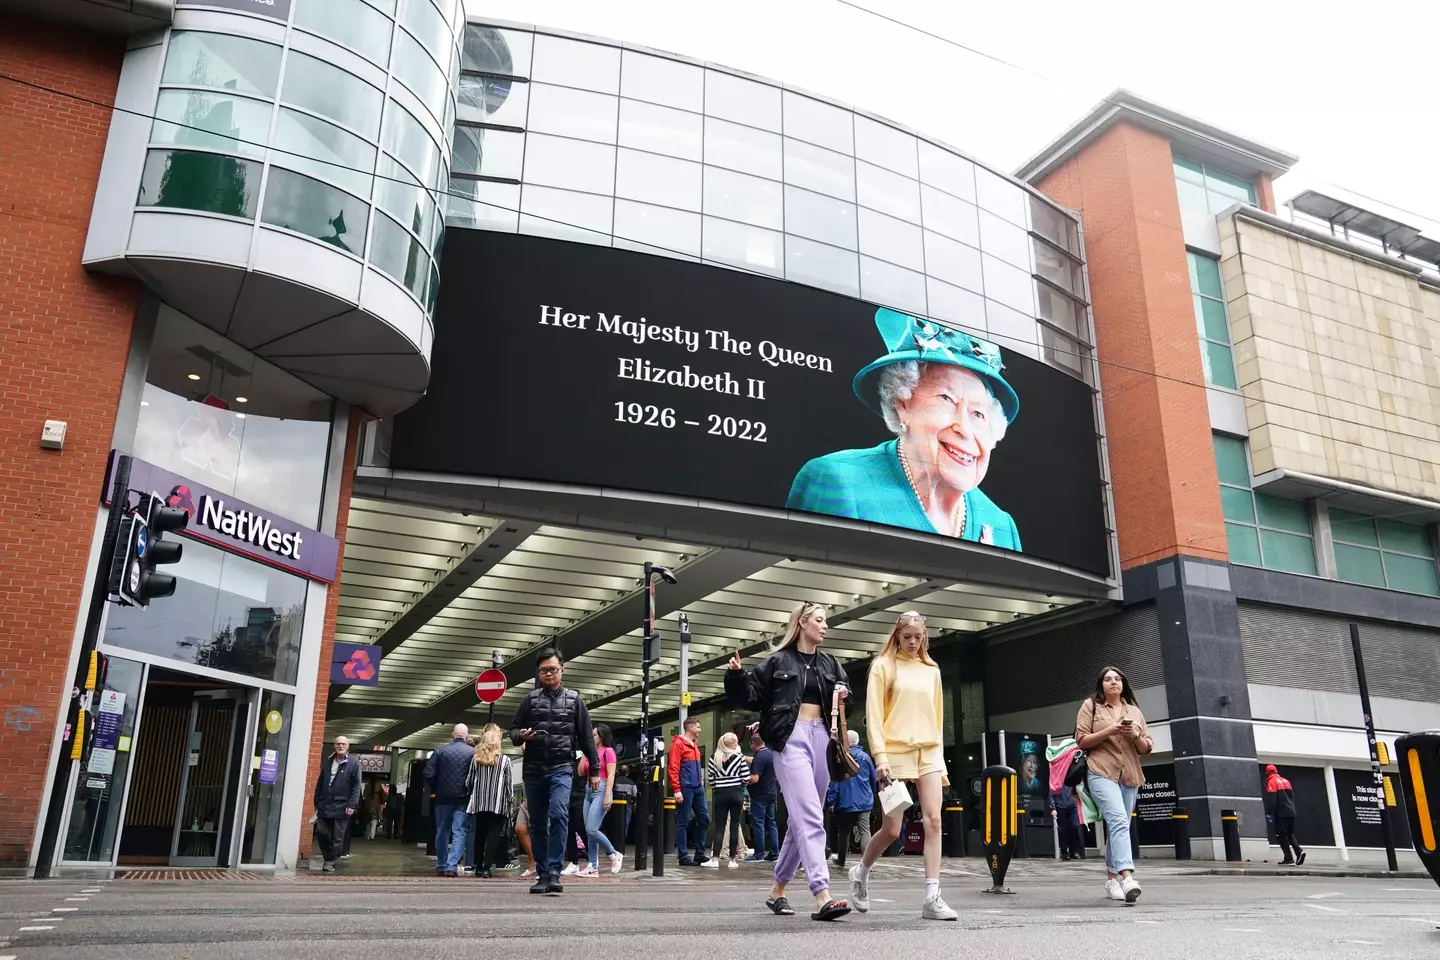 A petition has started to request a permanent bank holiday after The Queen's death.